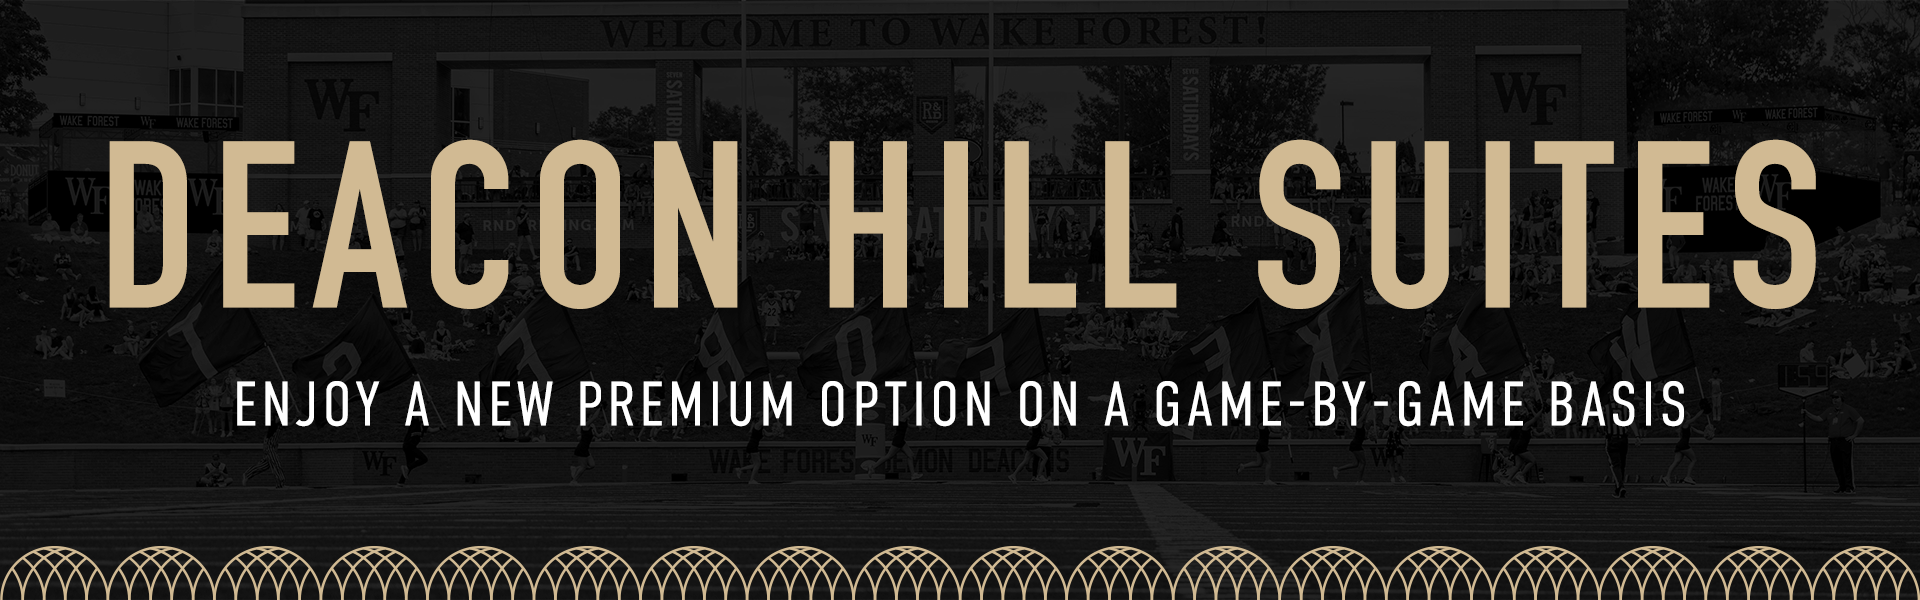 Deacon Hill Suites - Enjoy a New Premium Option on a Game-by-Game Basis